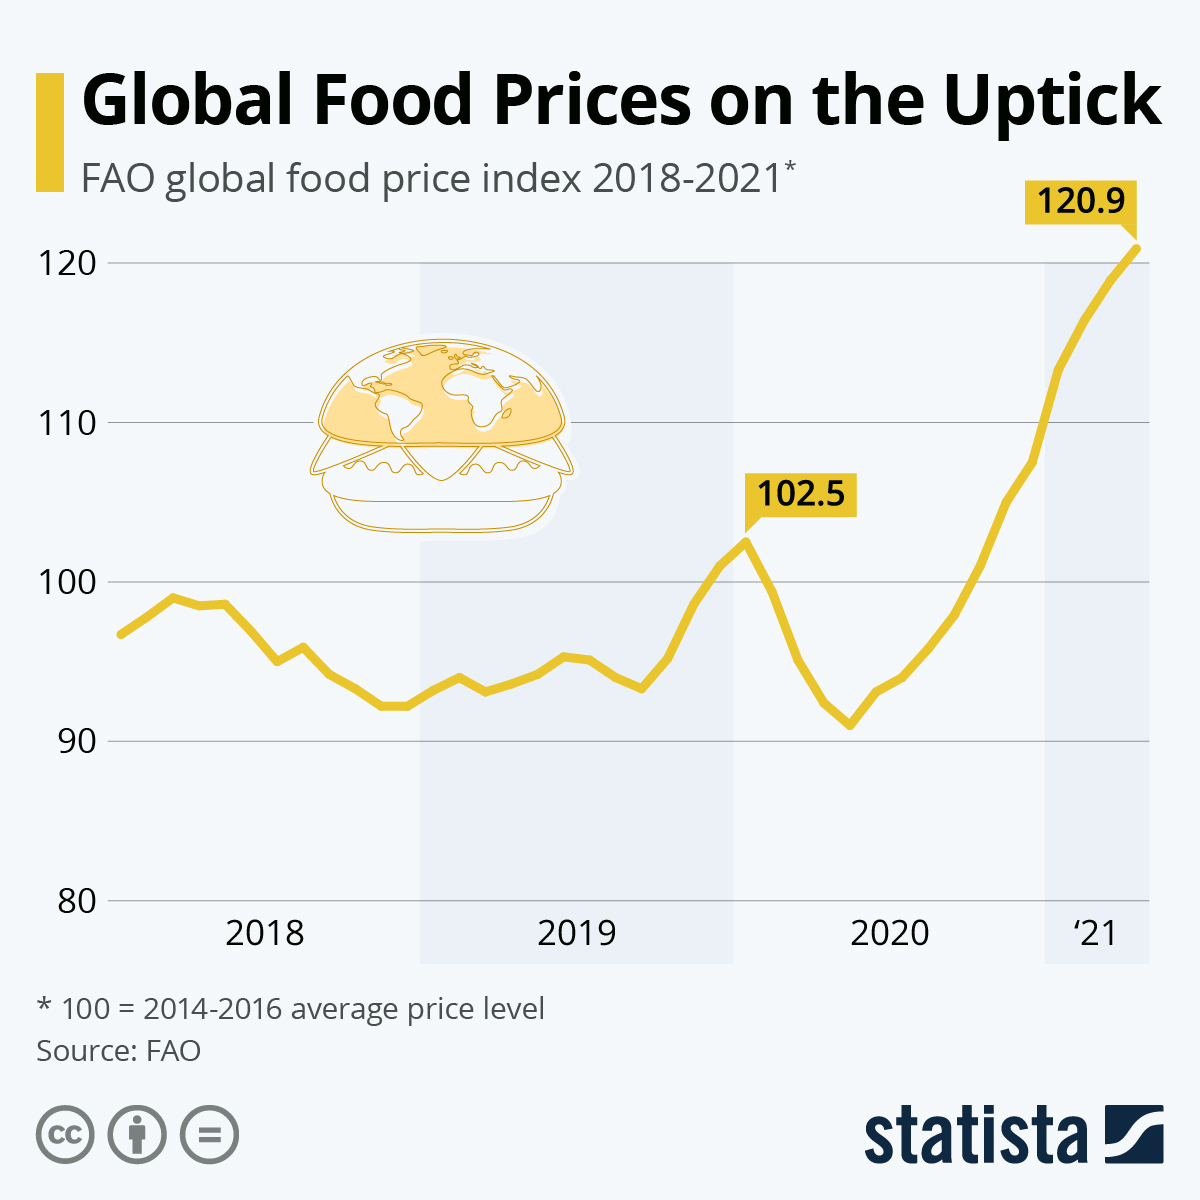 Global Food Prices on the Uptick